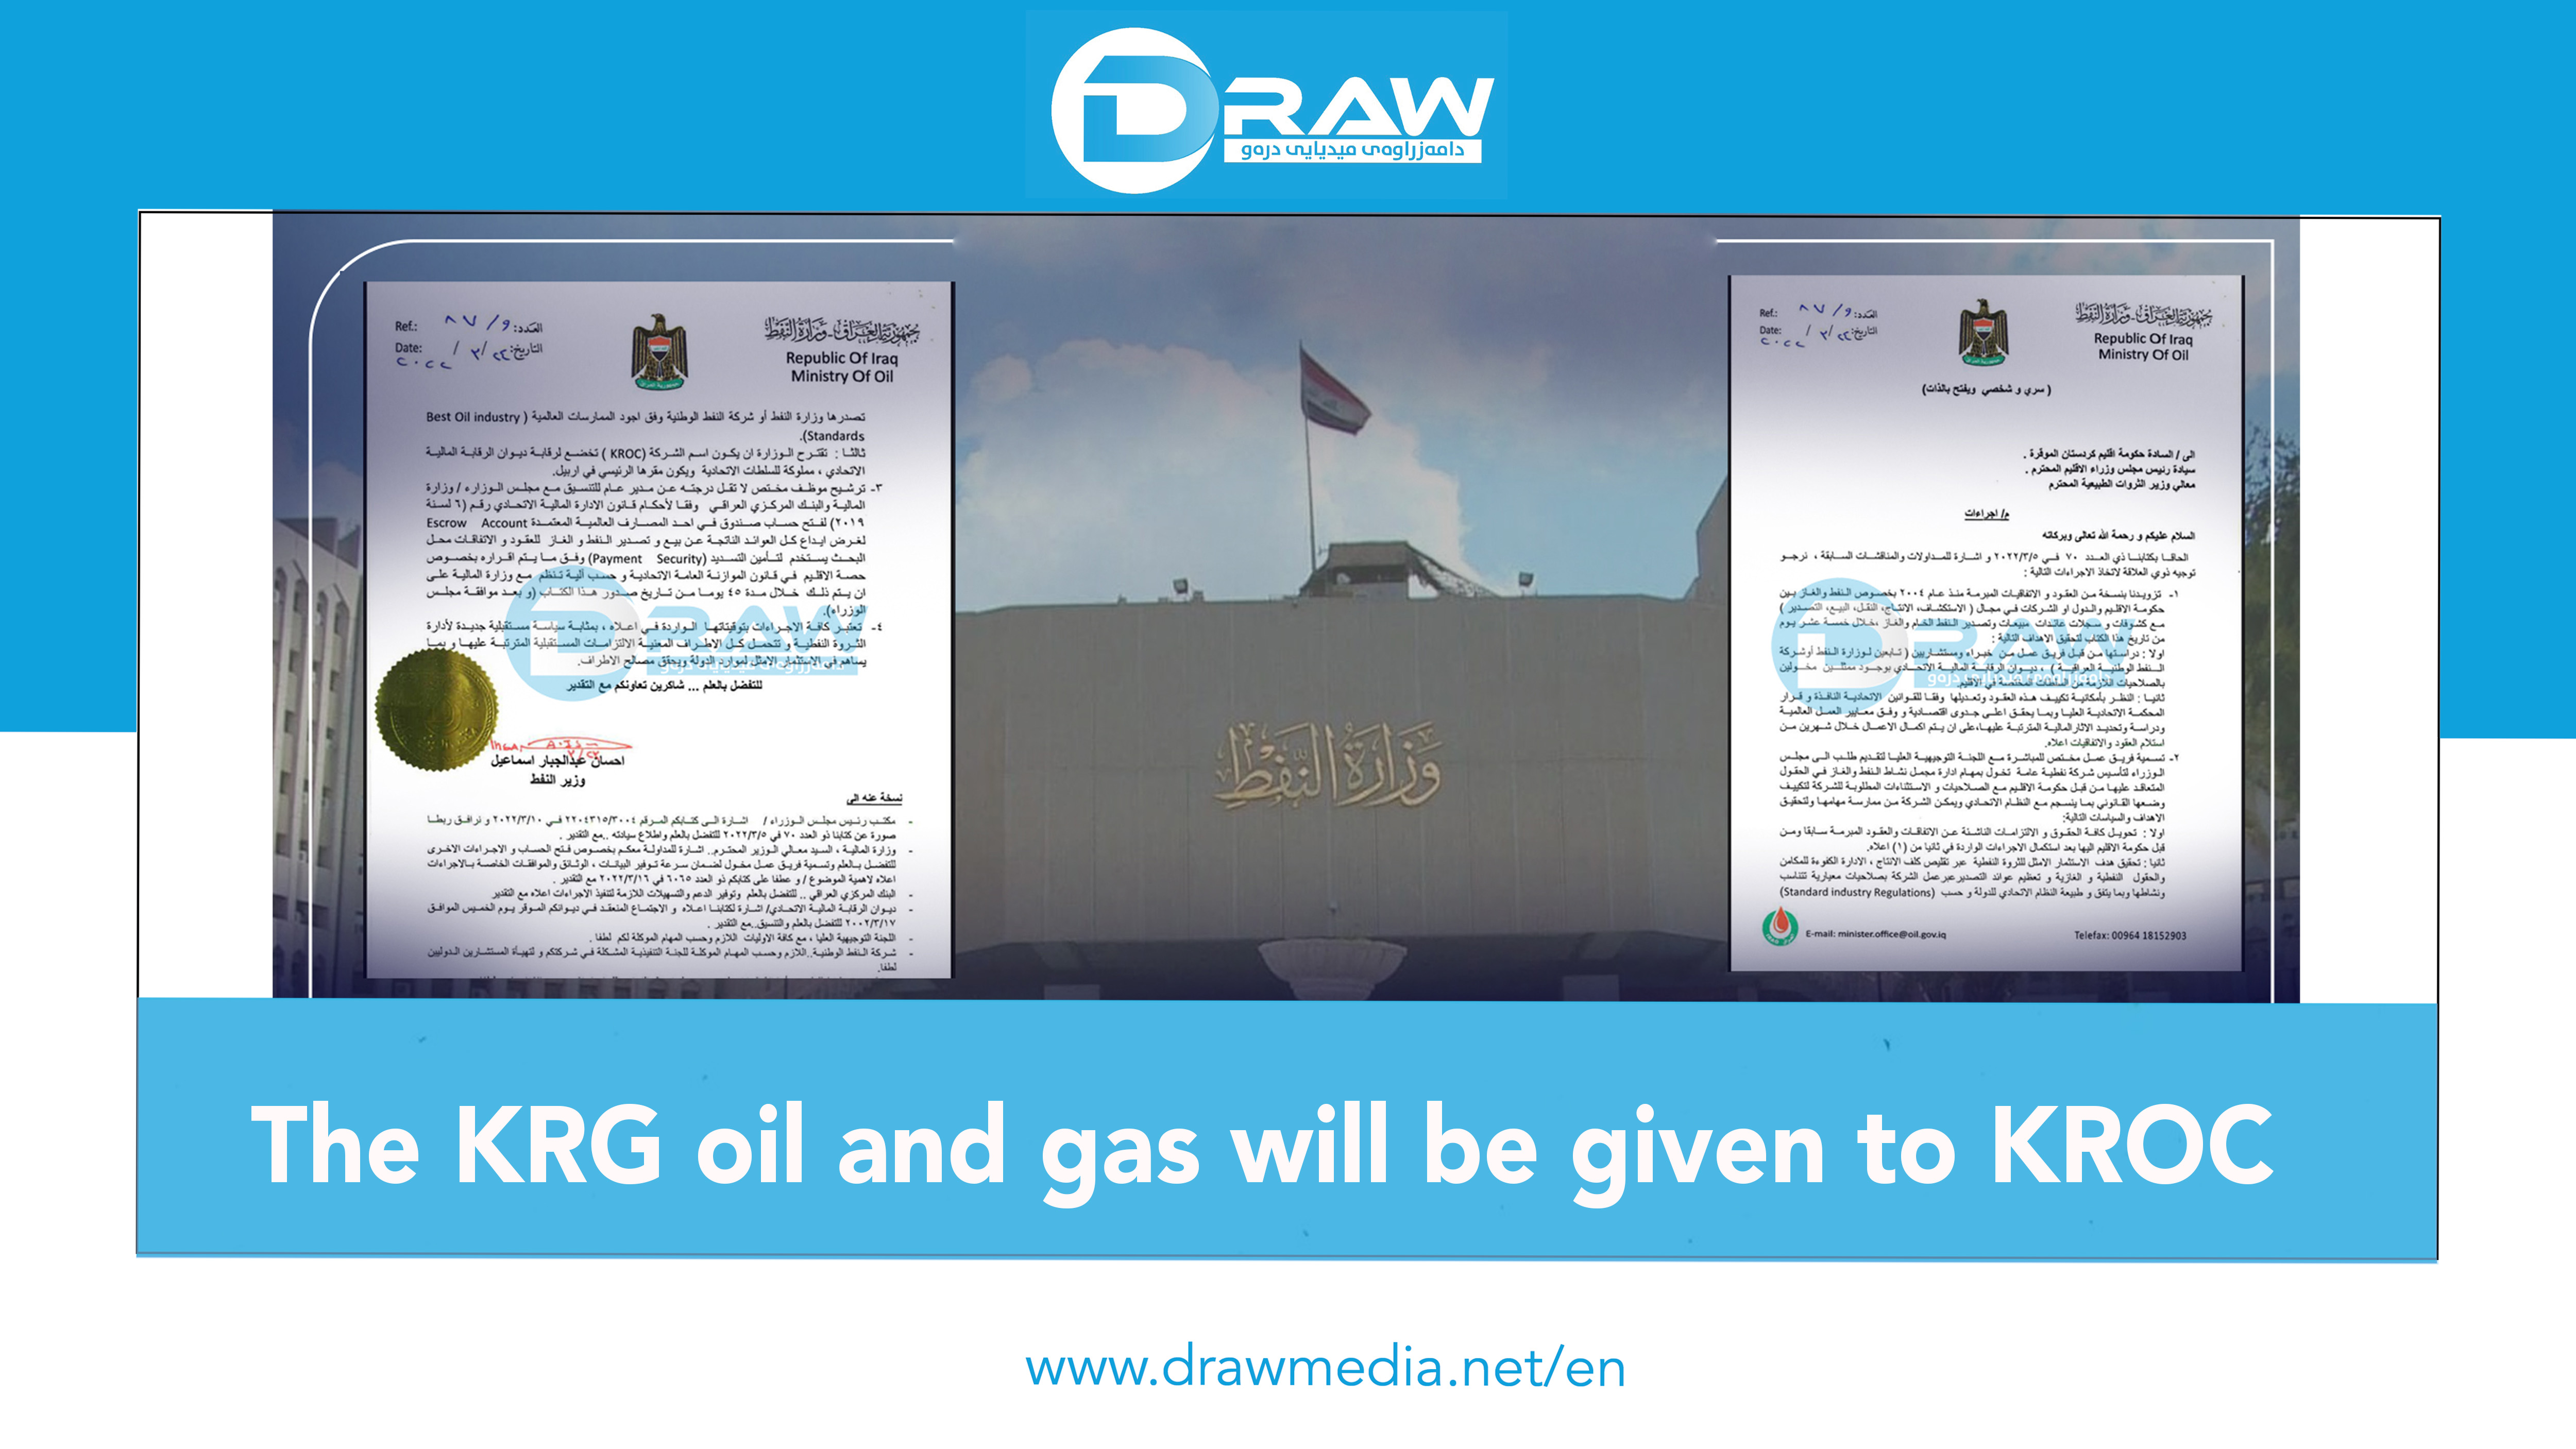 DrawMedia.net / The KRG oil and gas will be given to KROC